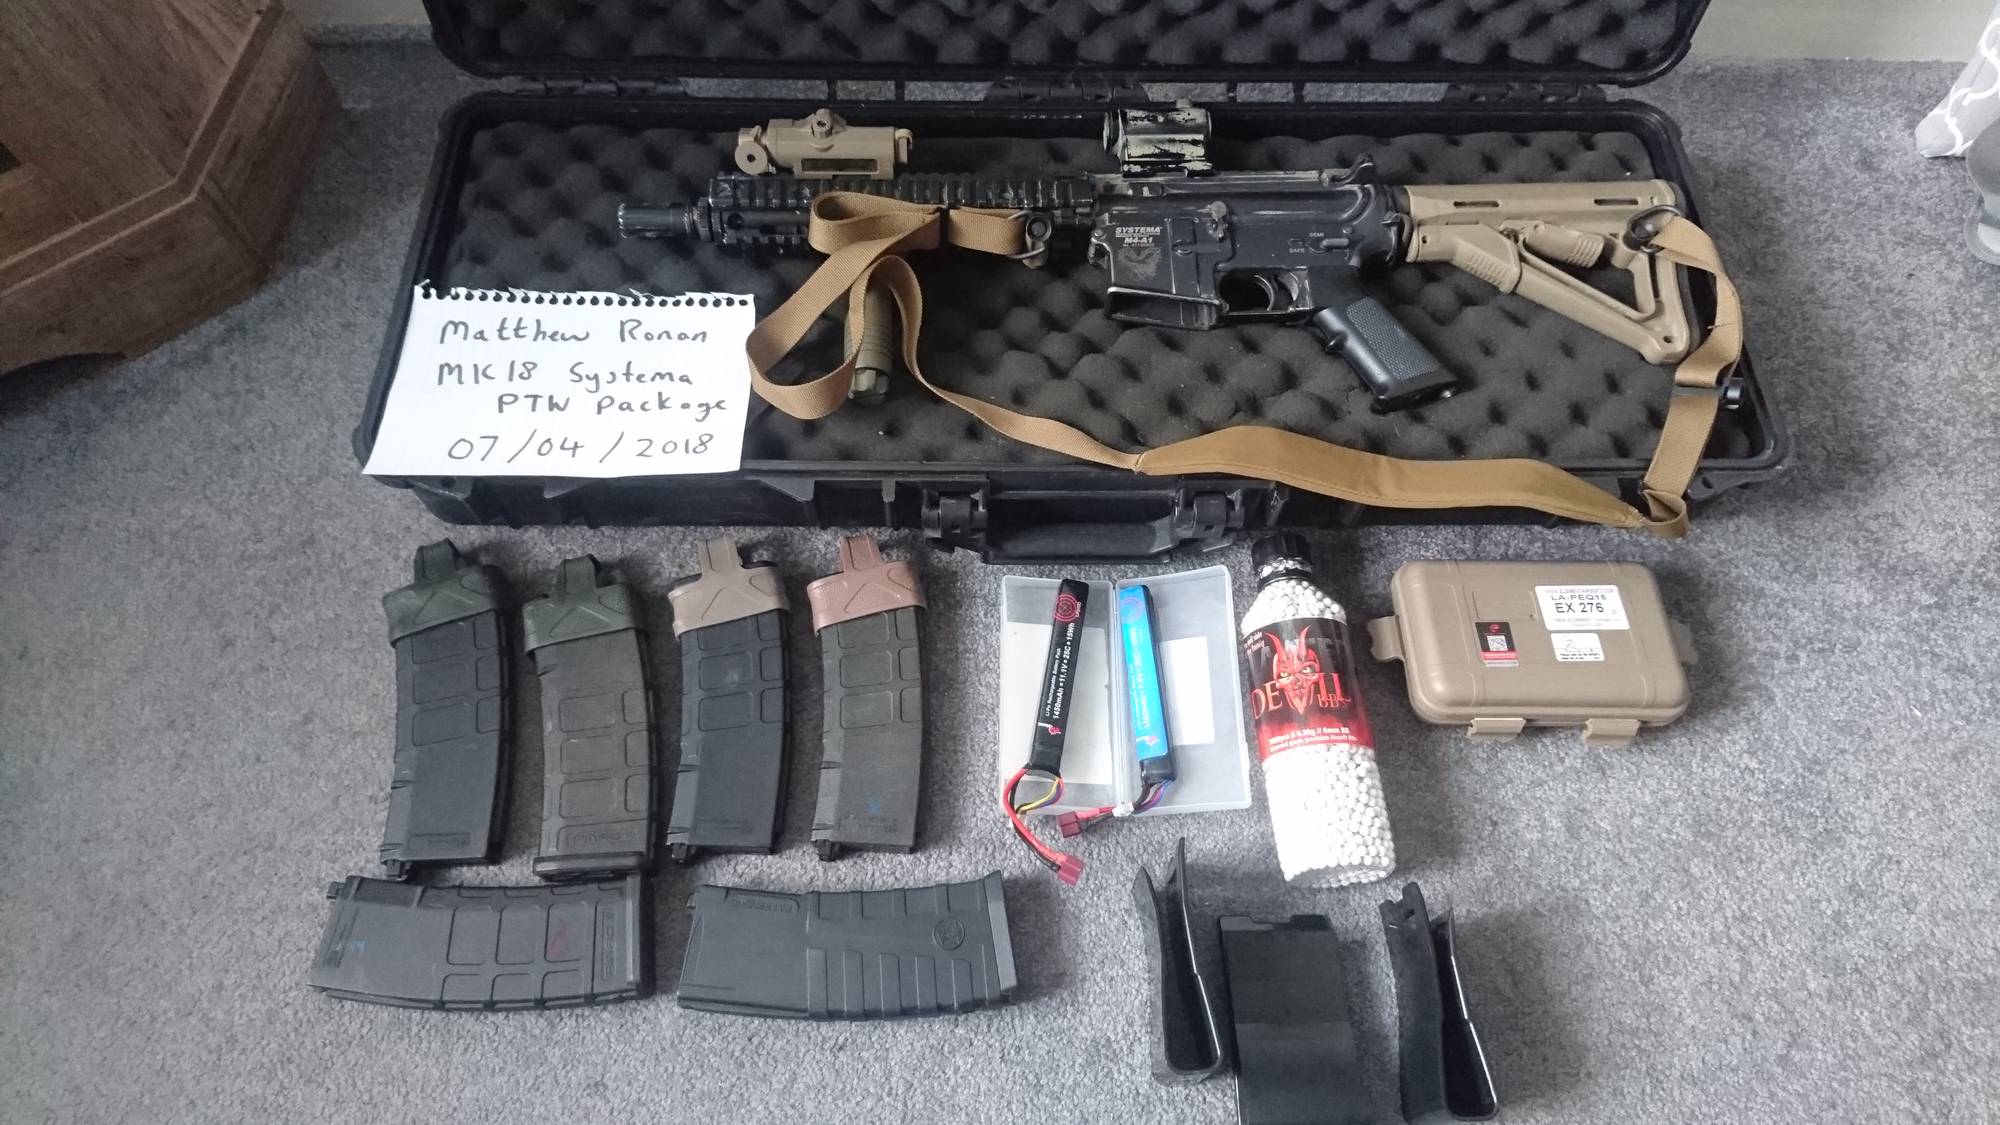 Mk18 systema ptw package - Electric Rifles - Airsoft Forums UK